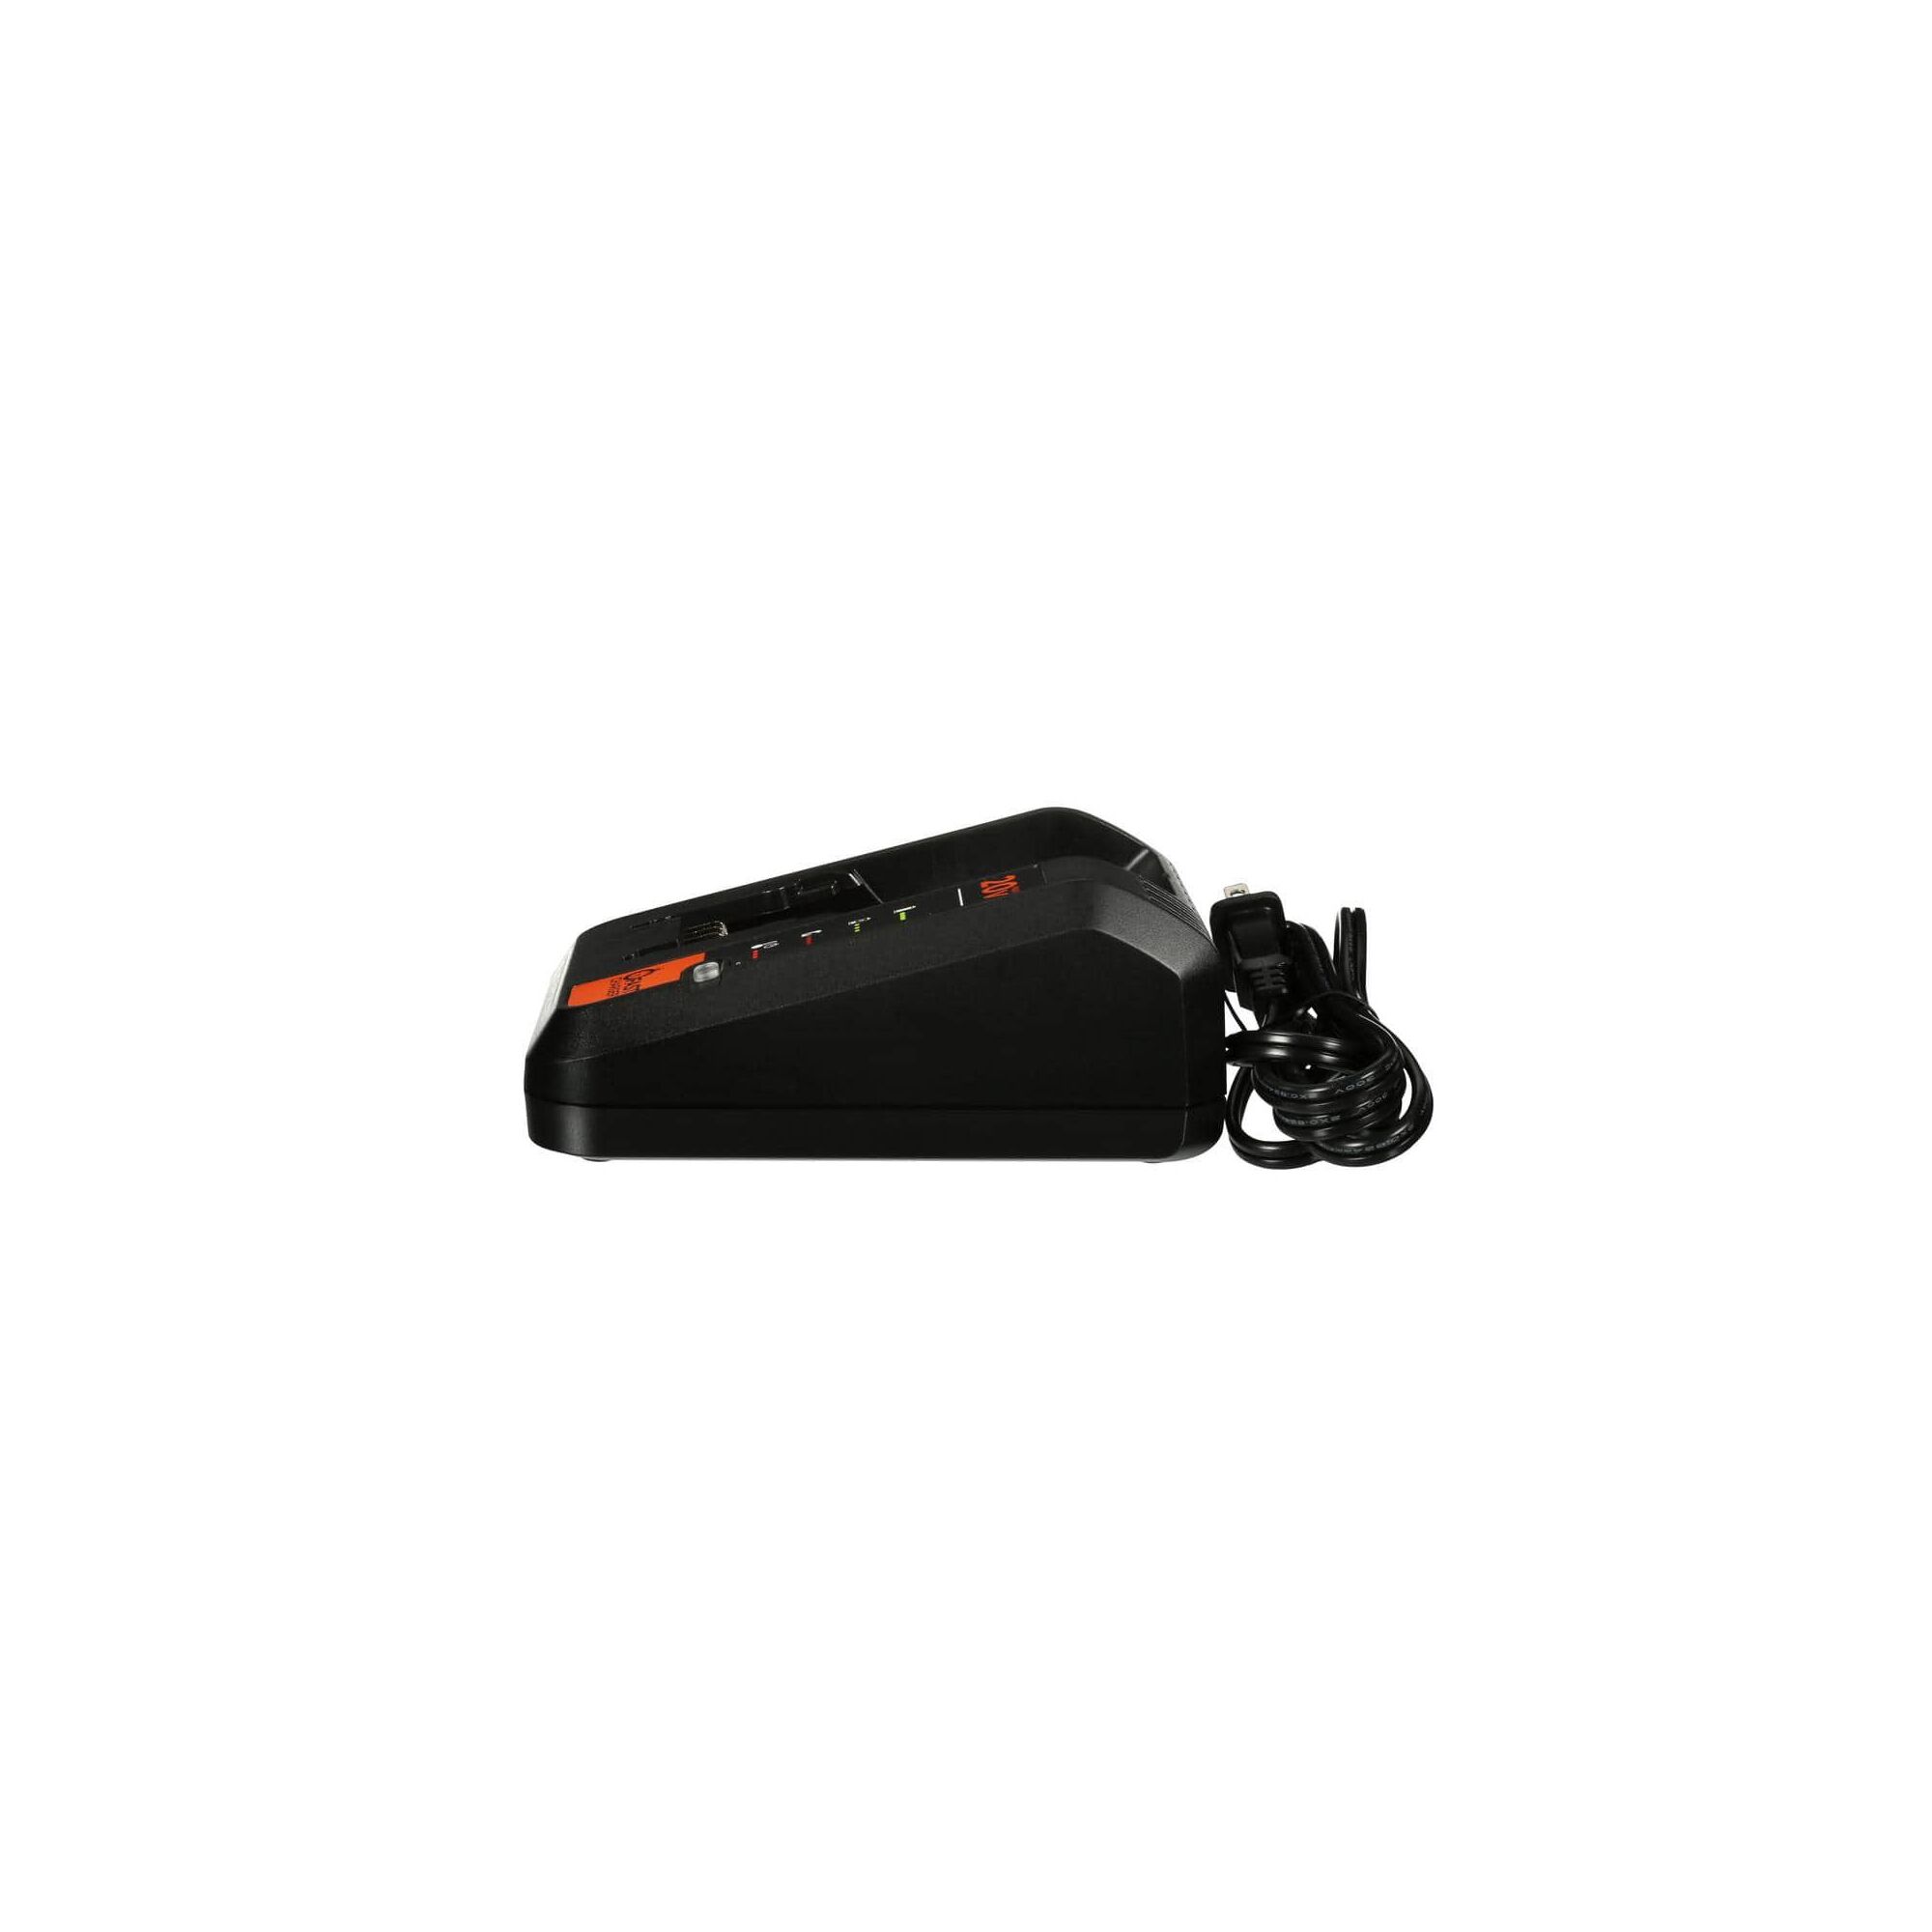 Side profile of black and decker lithium fast charger.